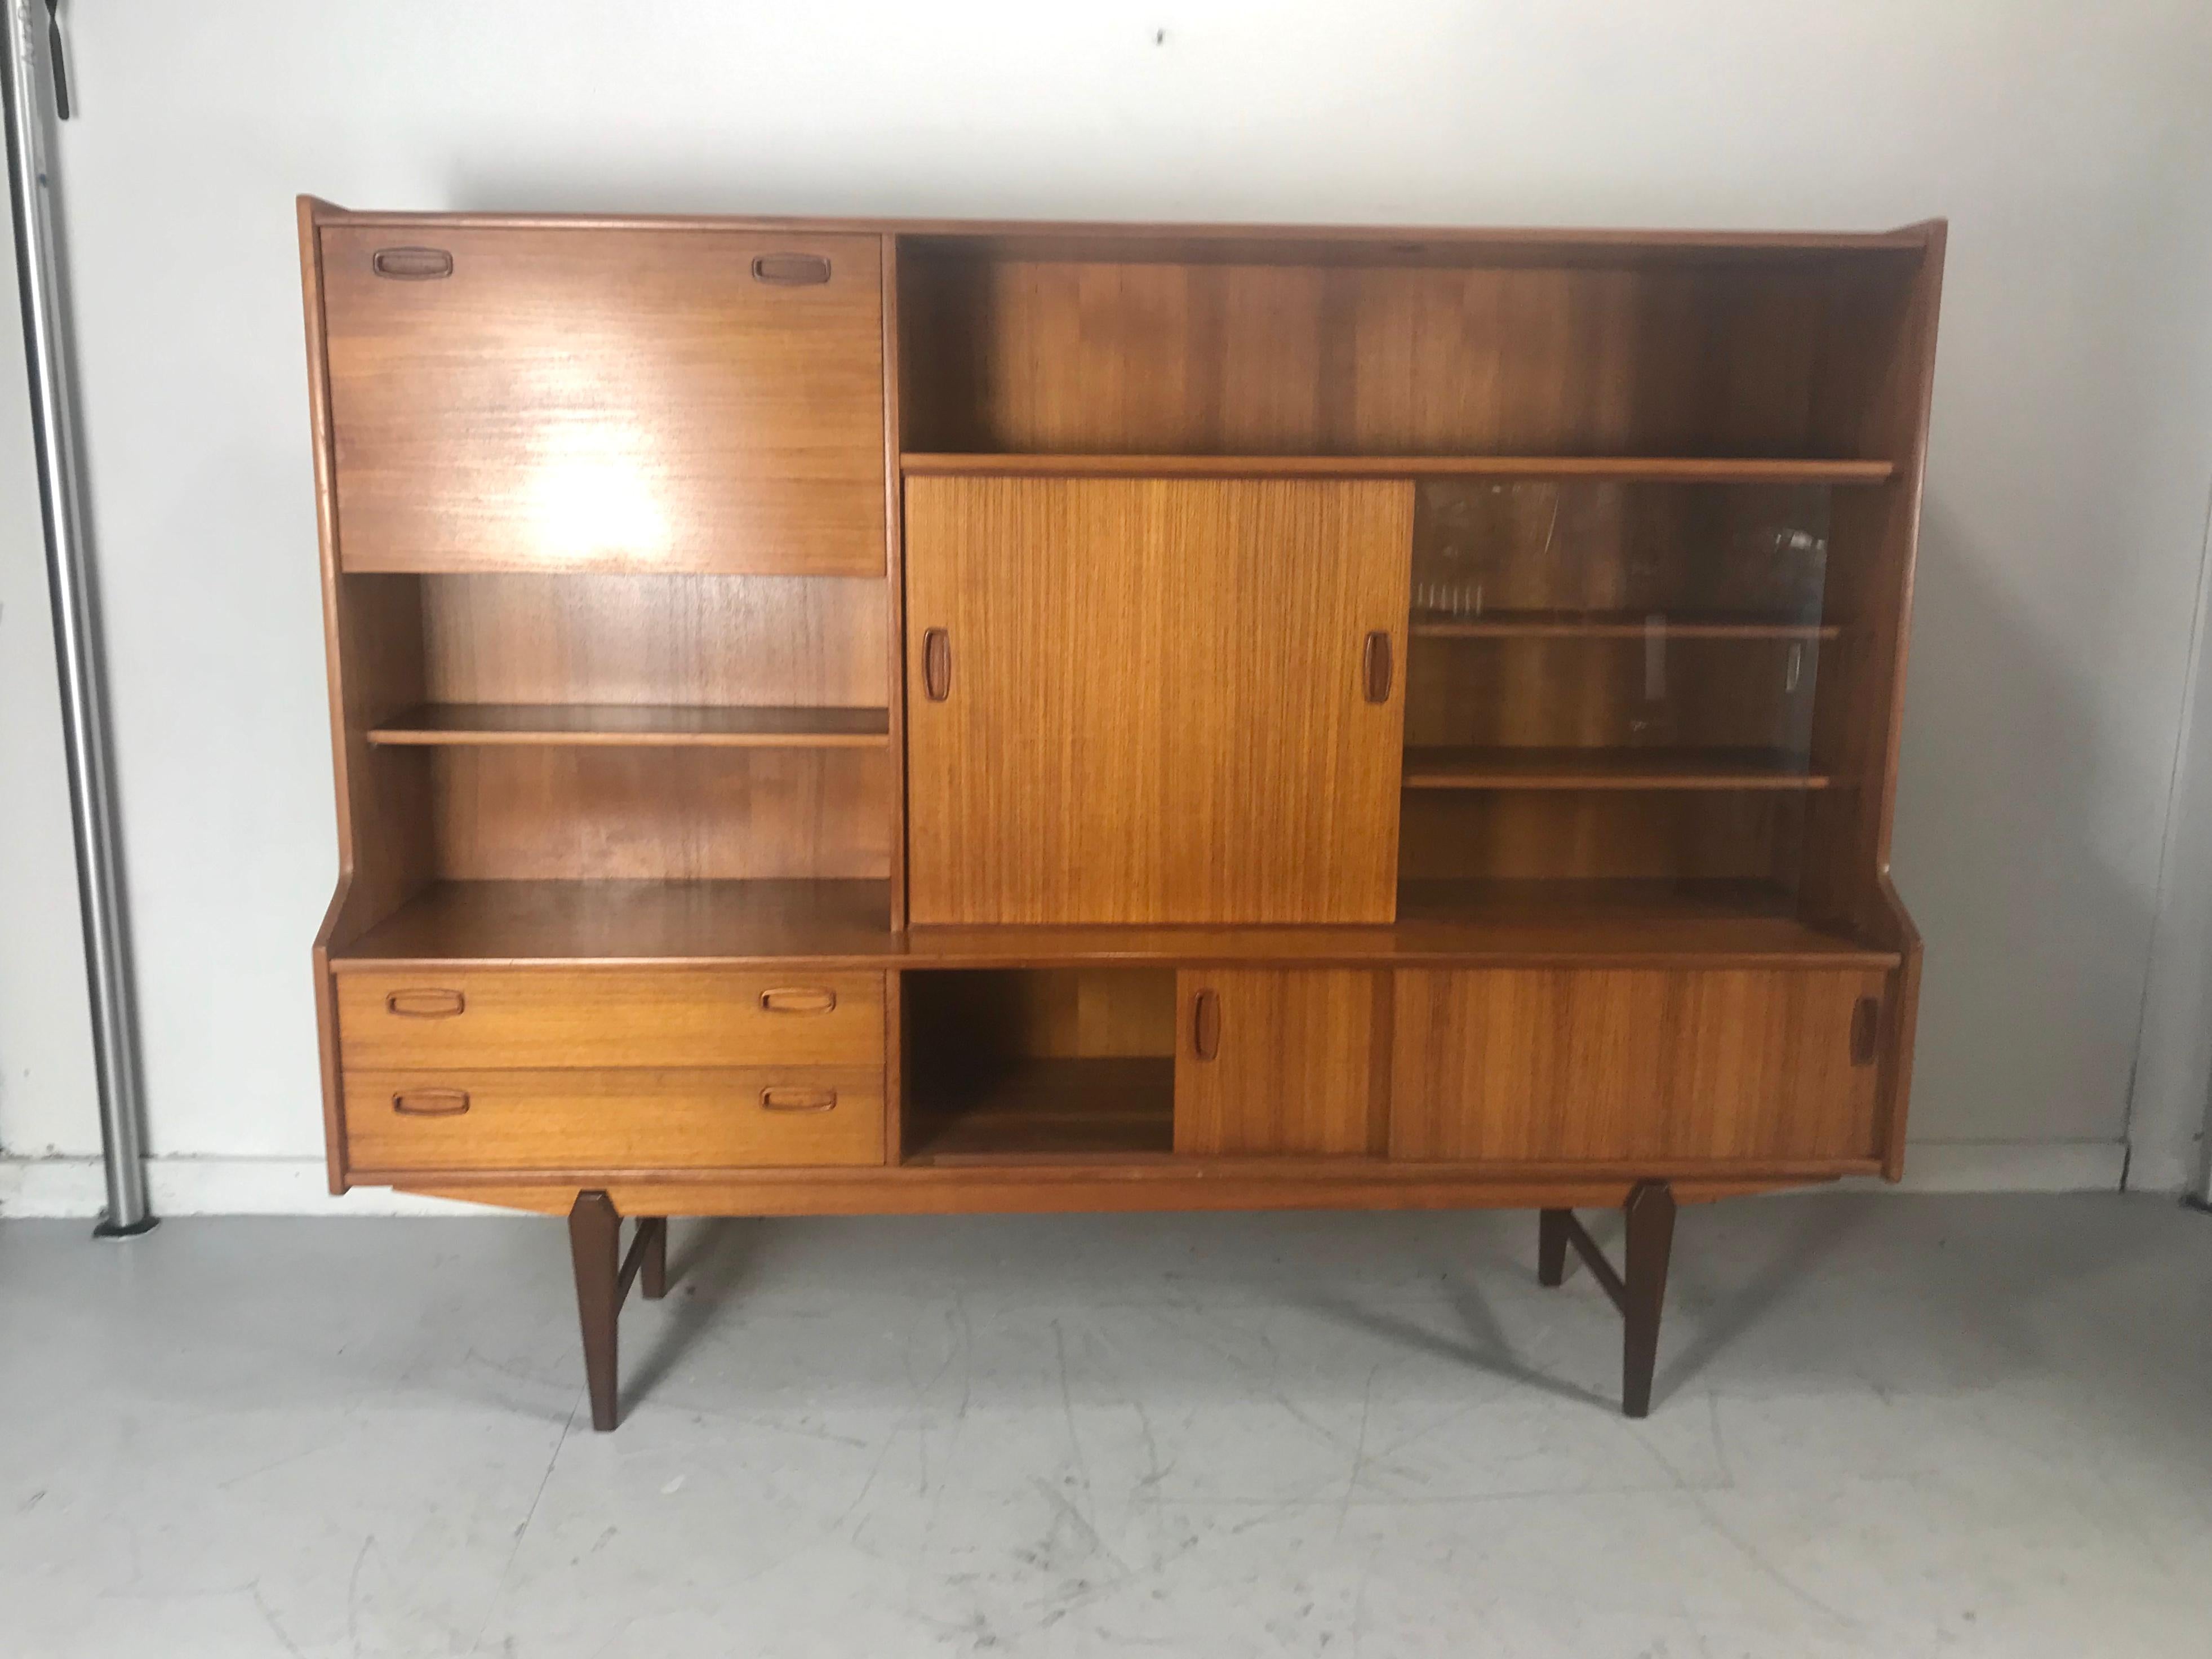 Classic Danish teak cabinet credenza / bar attributed to Omann Jun, perfectly designed. generous storage, sliding doors, wood and glass, drop down bar with light,, silverware drawer, shelves, hand delivery avail to New York City or anywhere en route